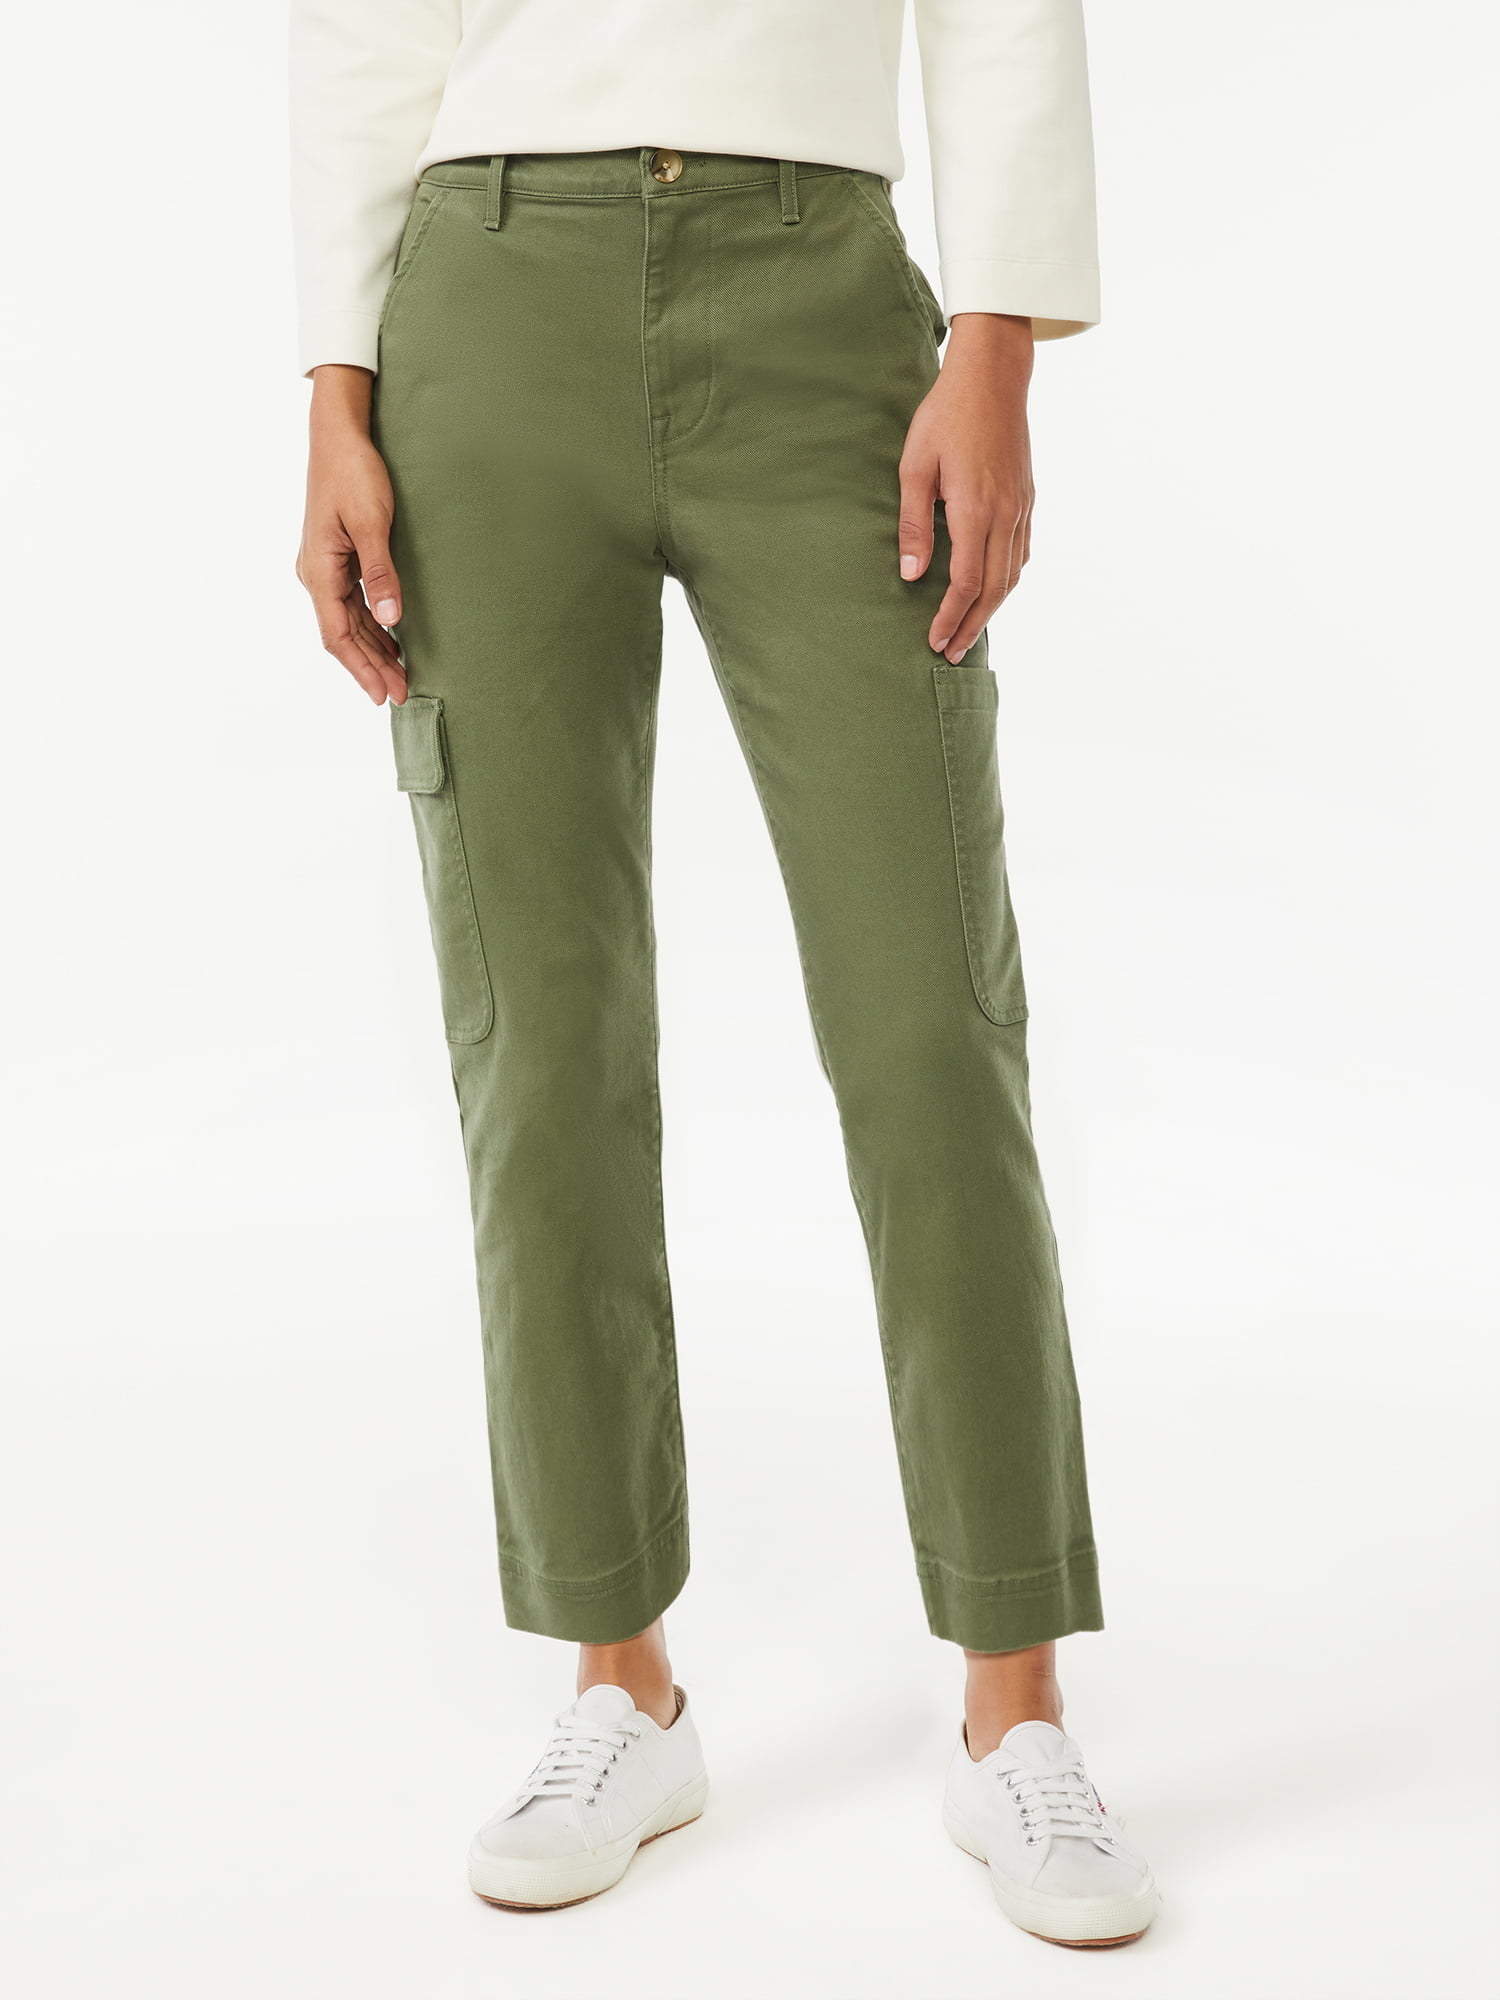 Model wearing white top and sneakers with green cargo pants